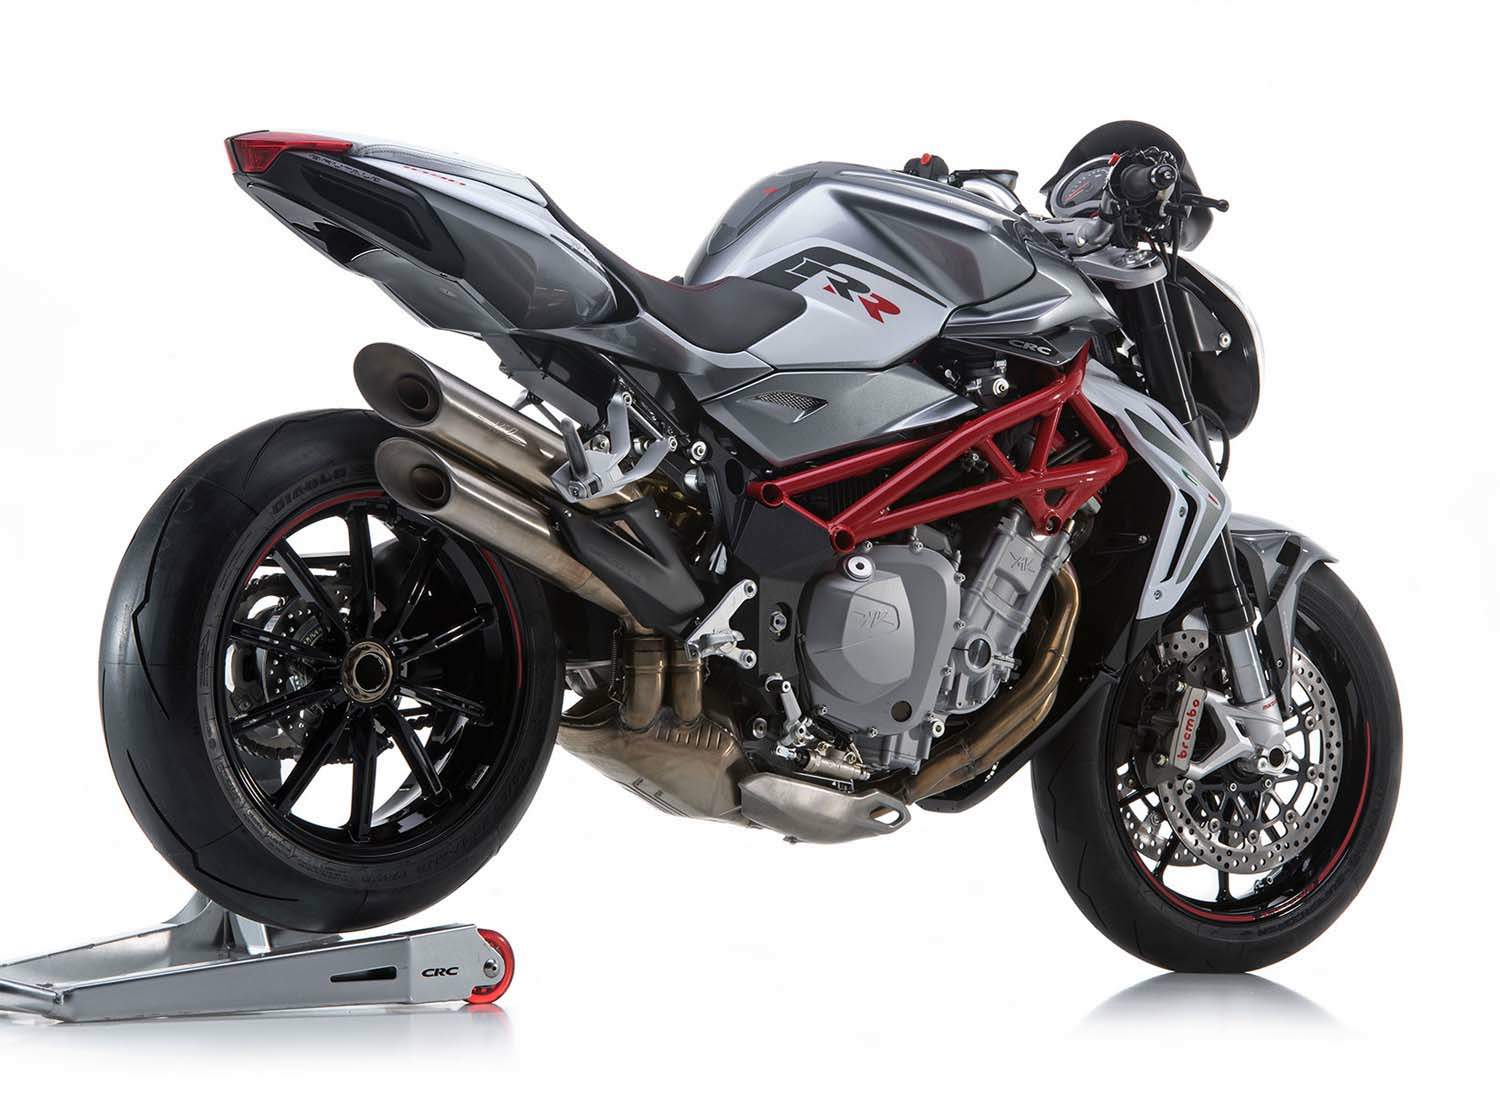 MV Agusta Brutale 1090RR technical specifications